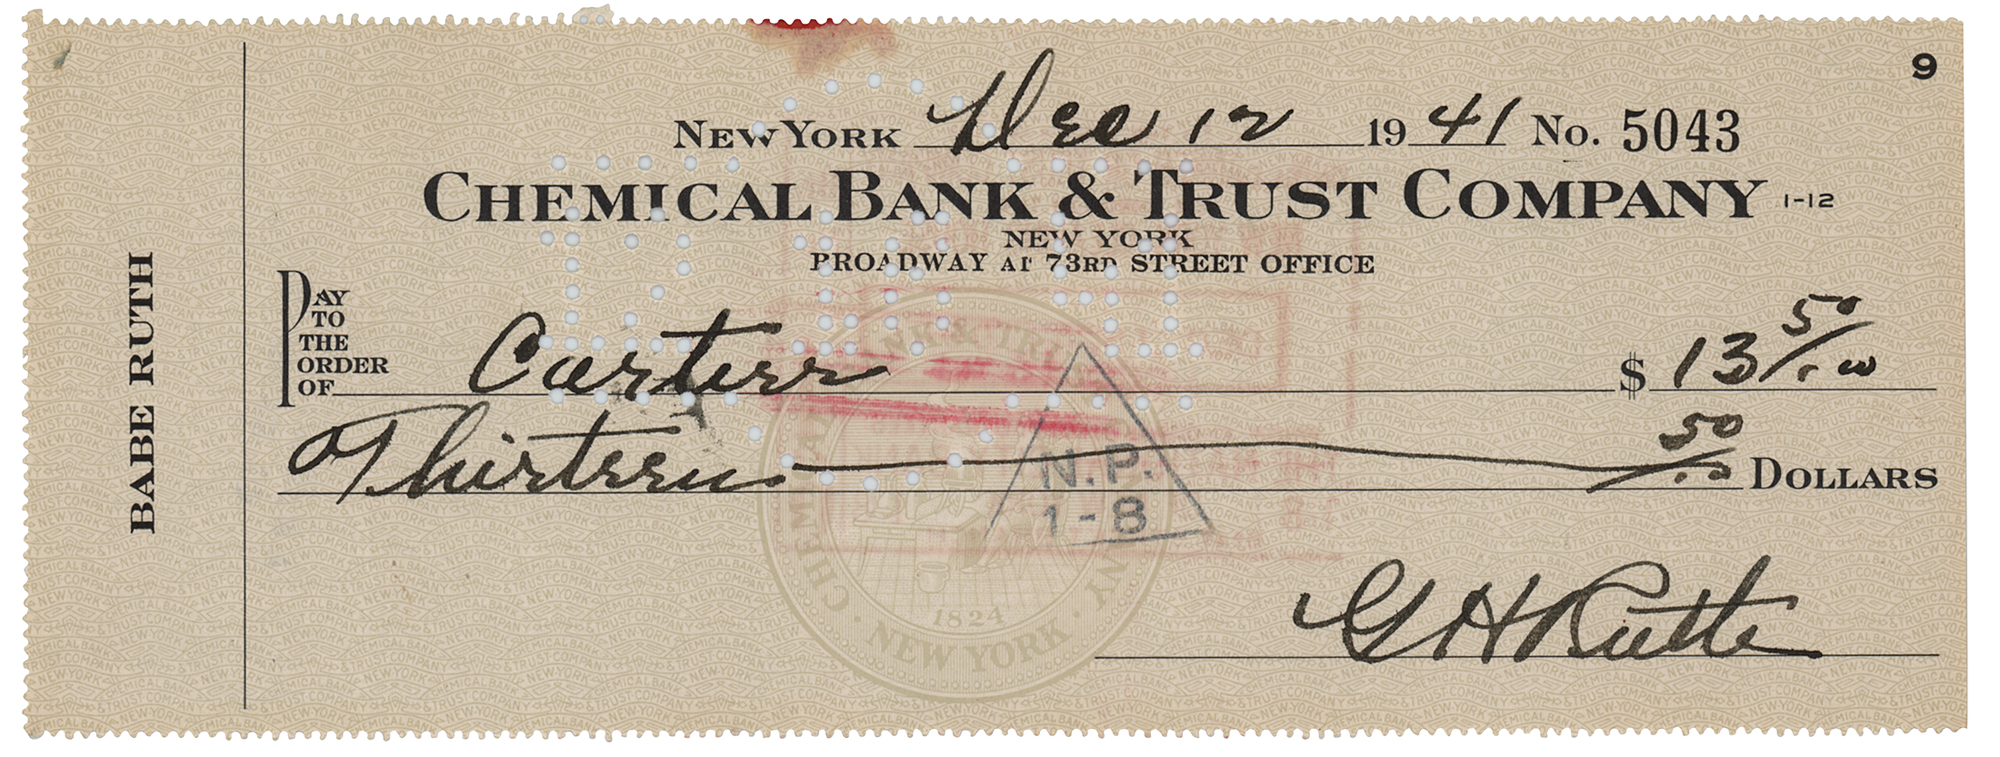 Babe Ruth Signed Check | Sold for $8,728 | RR Auction